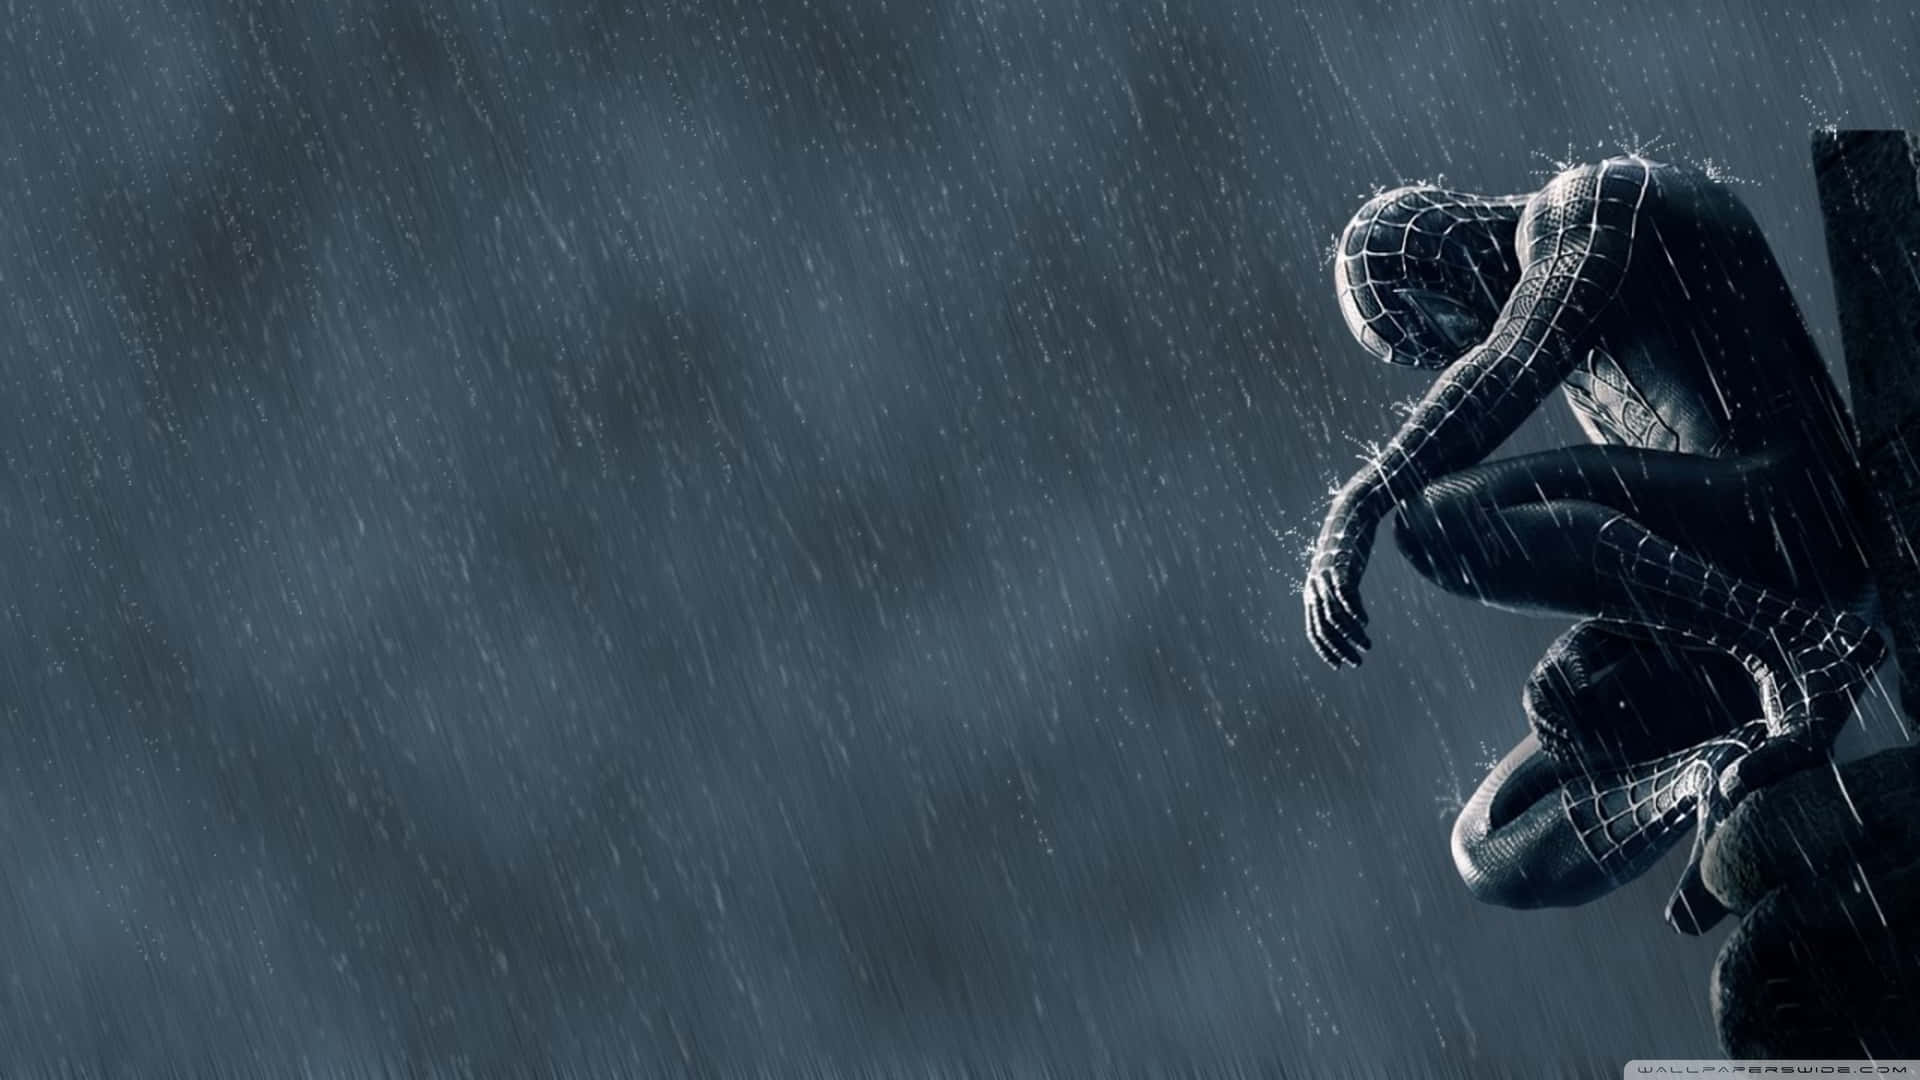 Spider Man Sitting On A Bench In The Rain Wallpaper